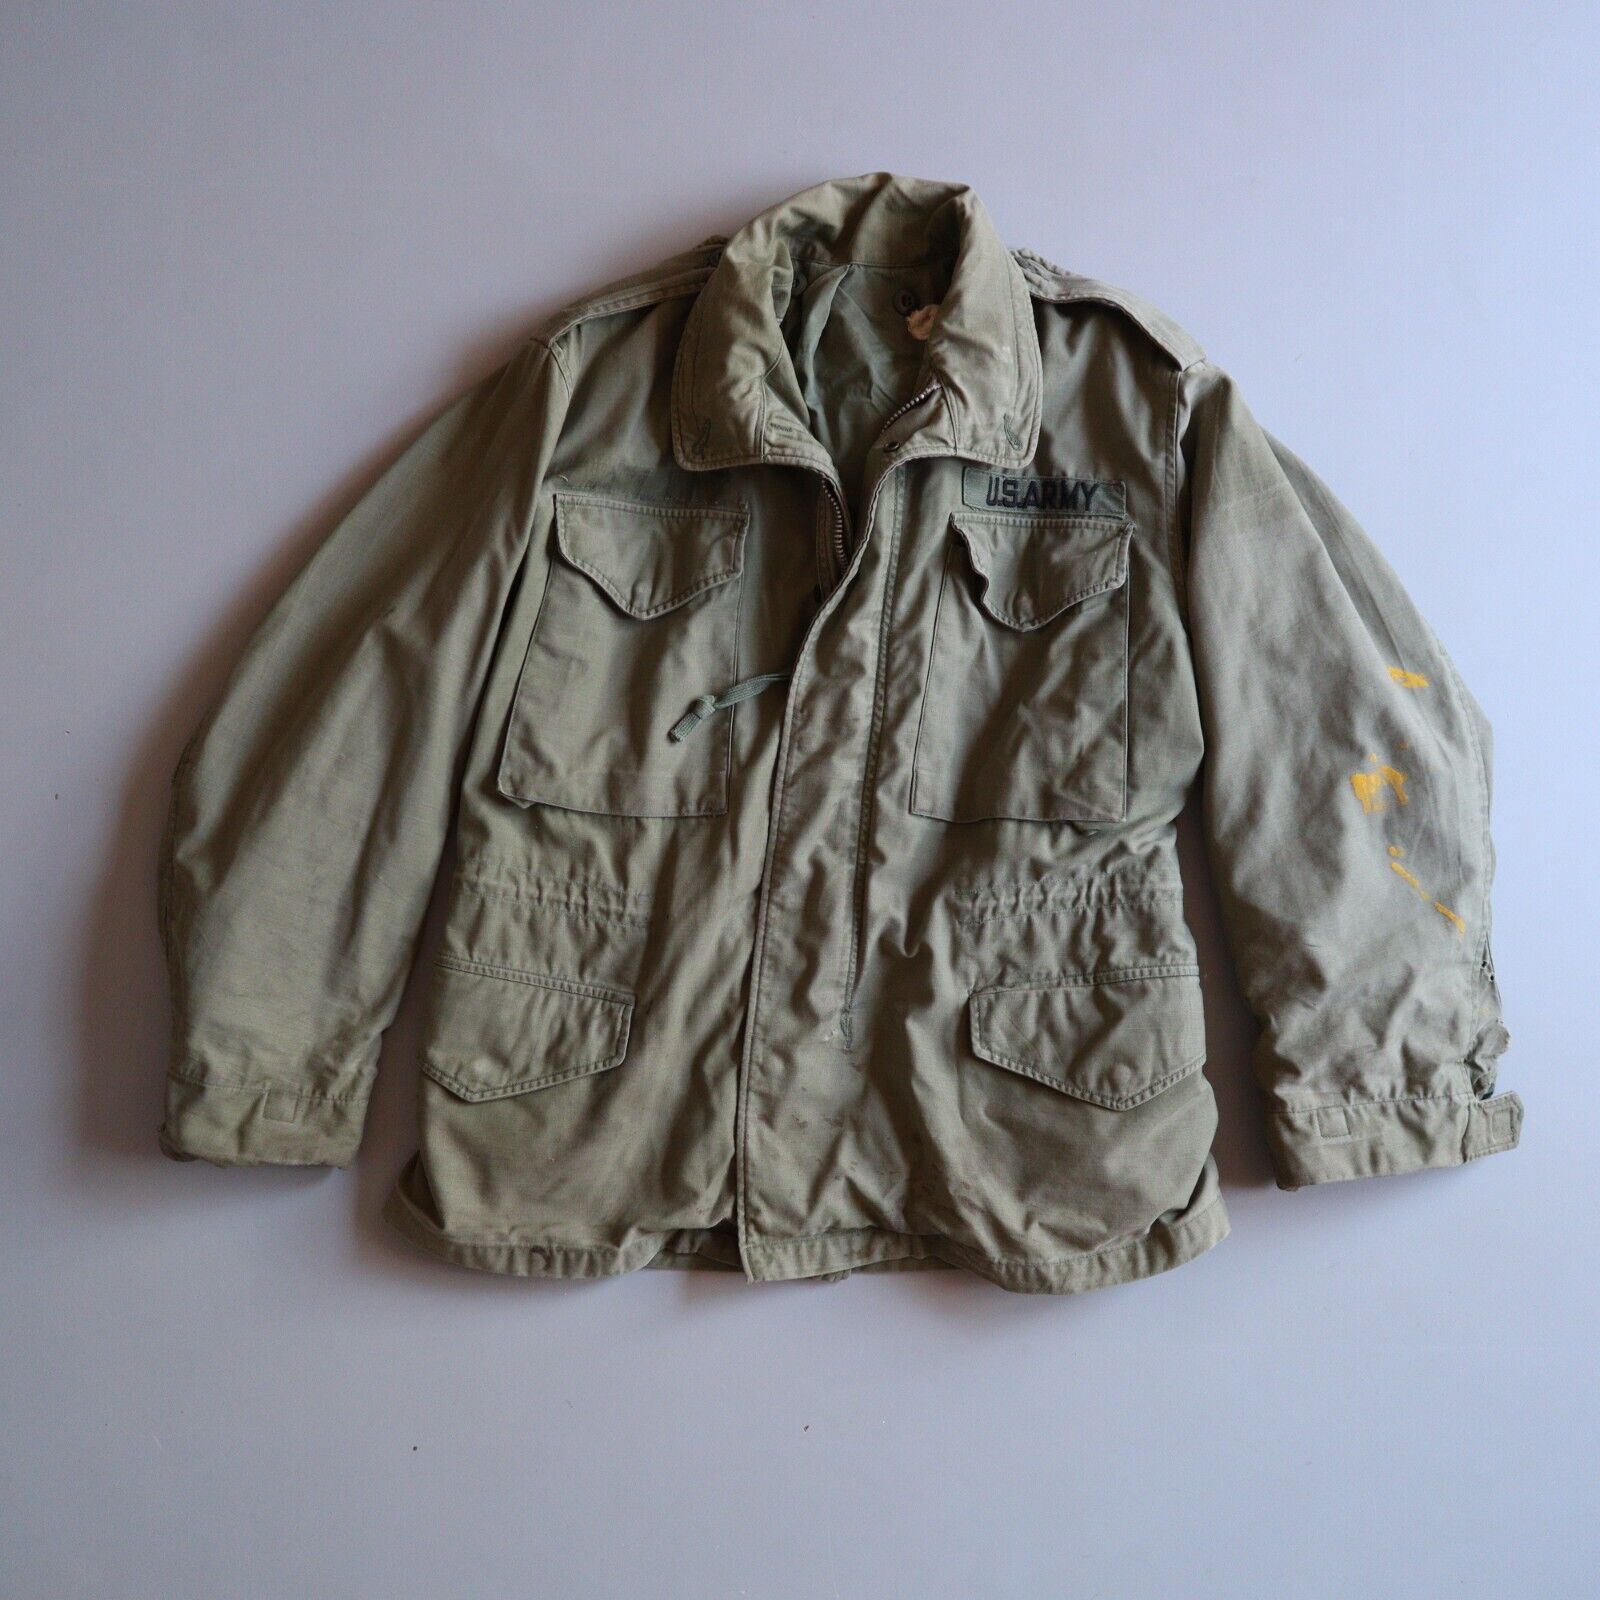 VINTAGE ARMY Green M65 FIELD JACKET Coat SIZE SMALL SHORT US Military Thrashed